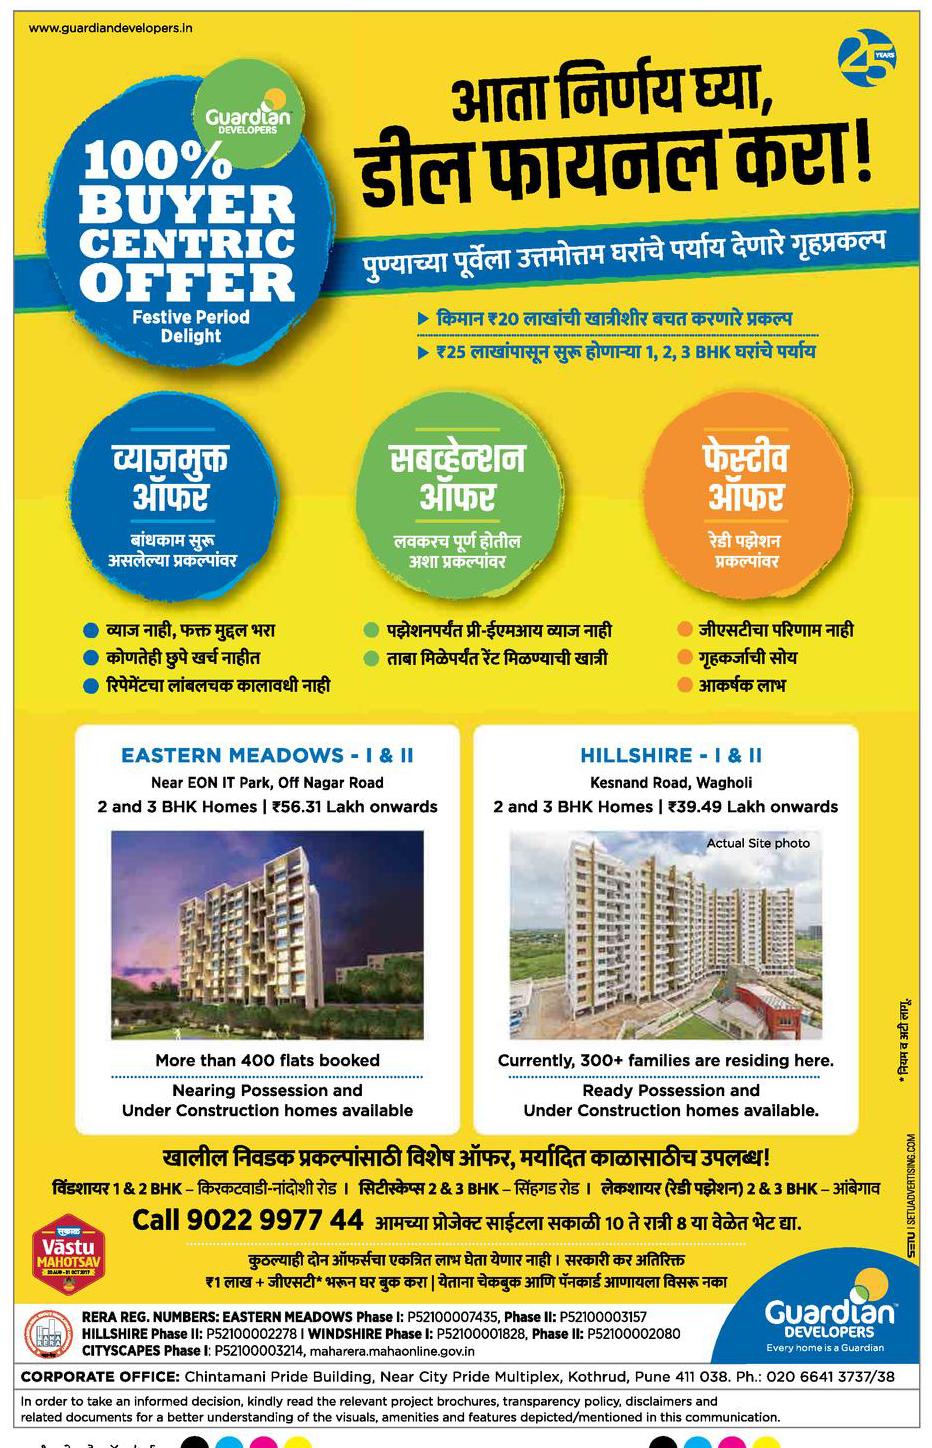 Guardian Developers 100% Buyer Centric Offer Festive Period Delight ...